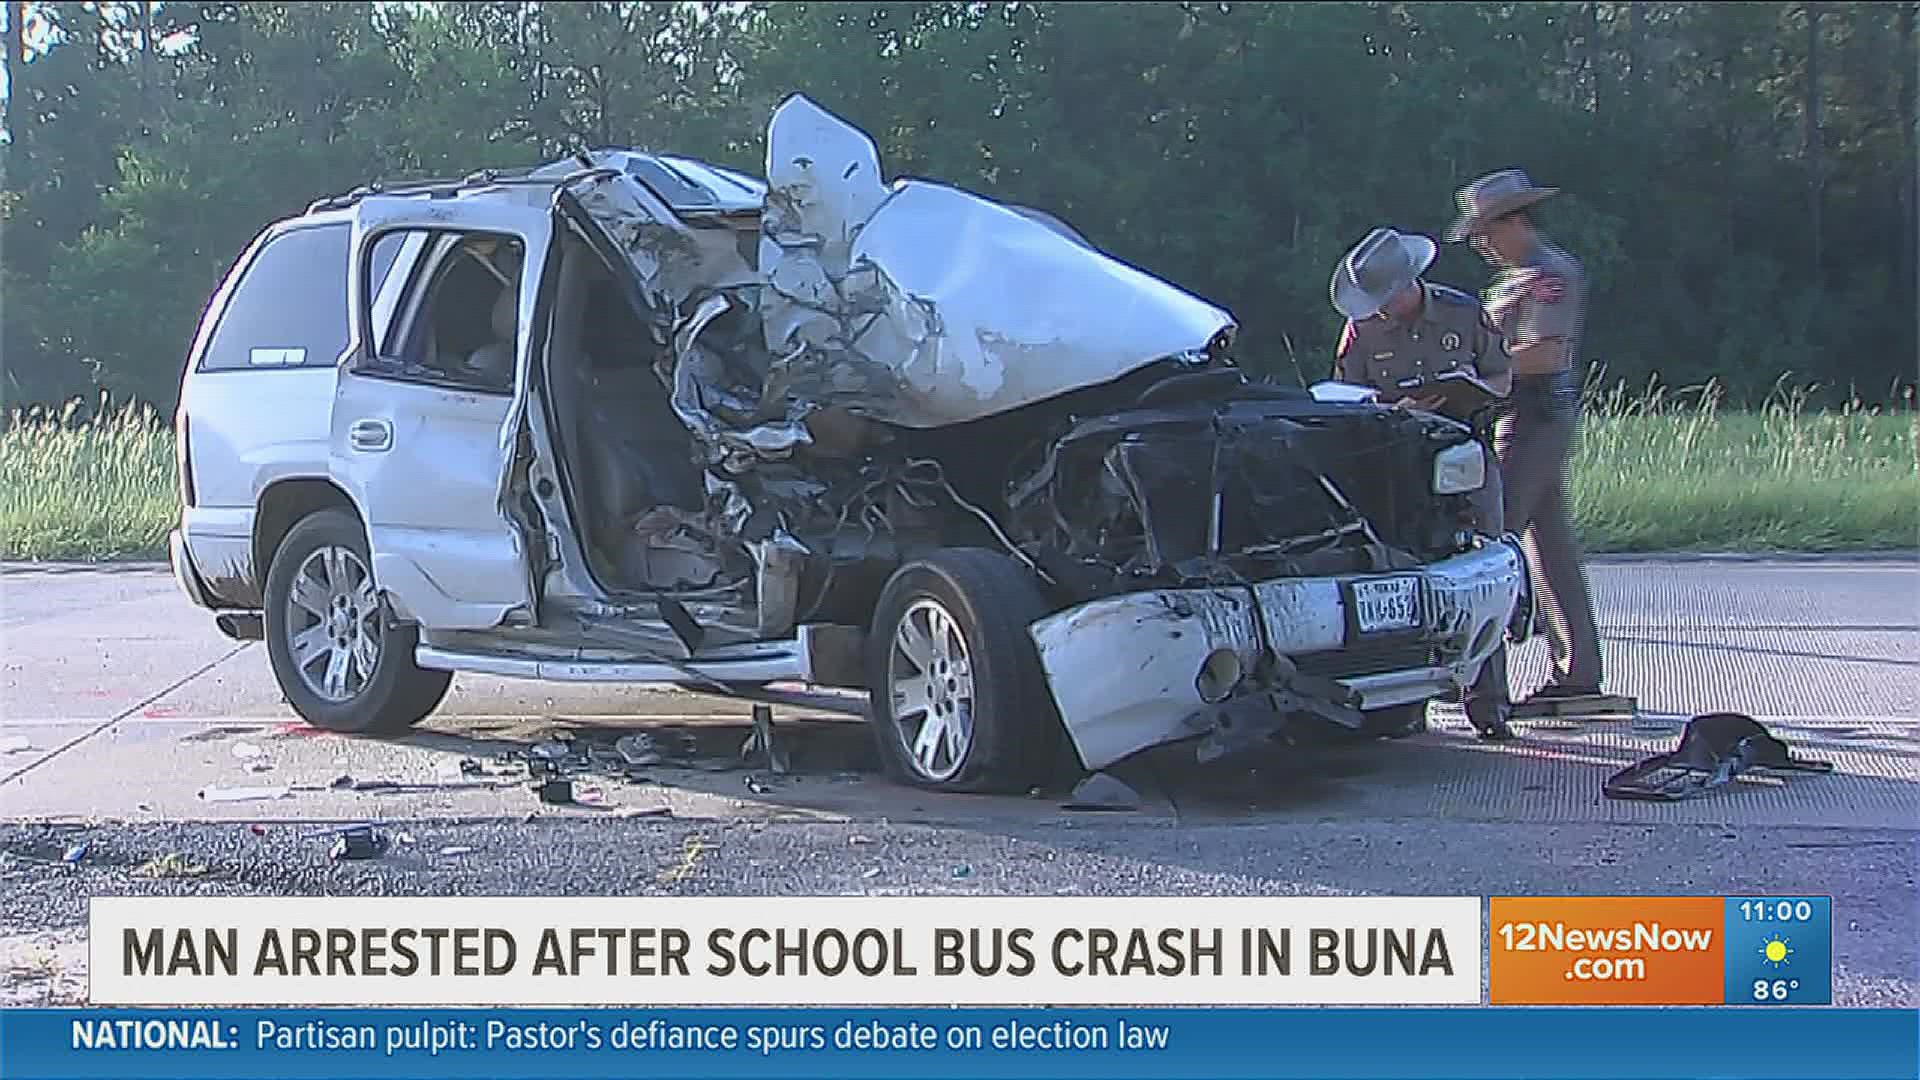 DPS troopers in Jasper County say an 18-year-old Buna man struck the rear of a Buna school bus and then ran away on foot Wednesday morning.